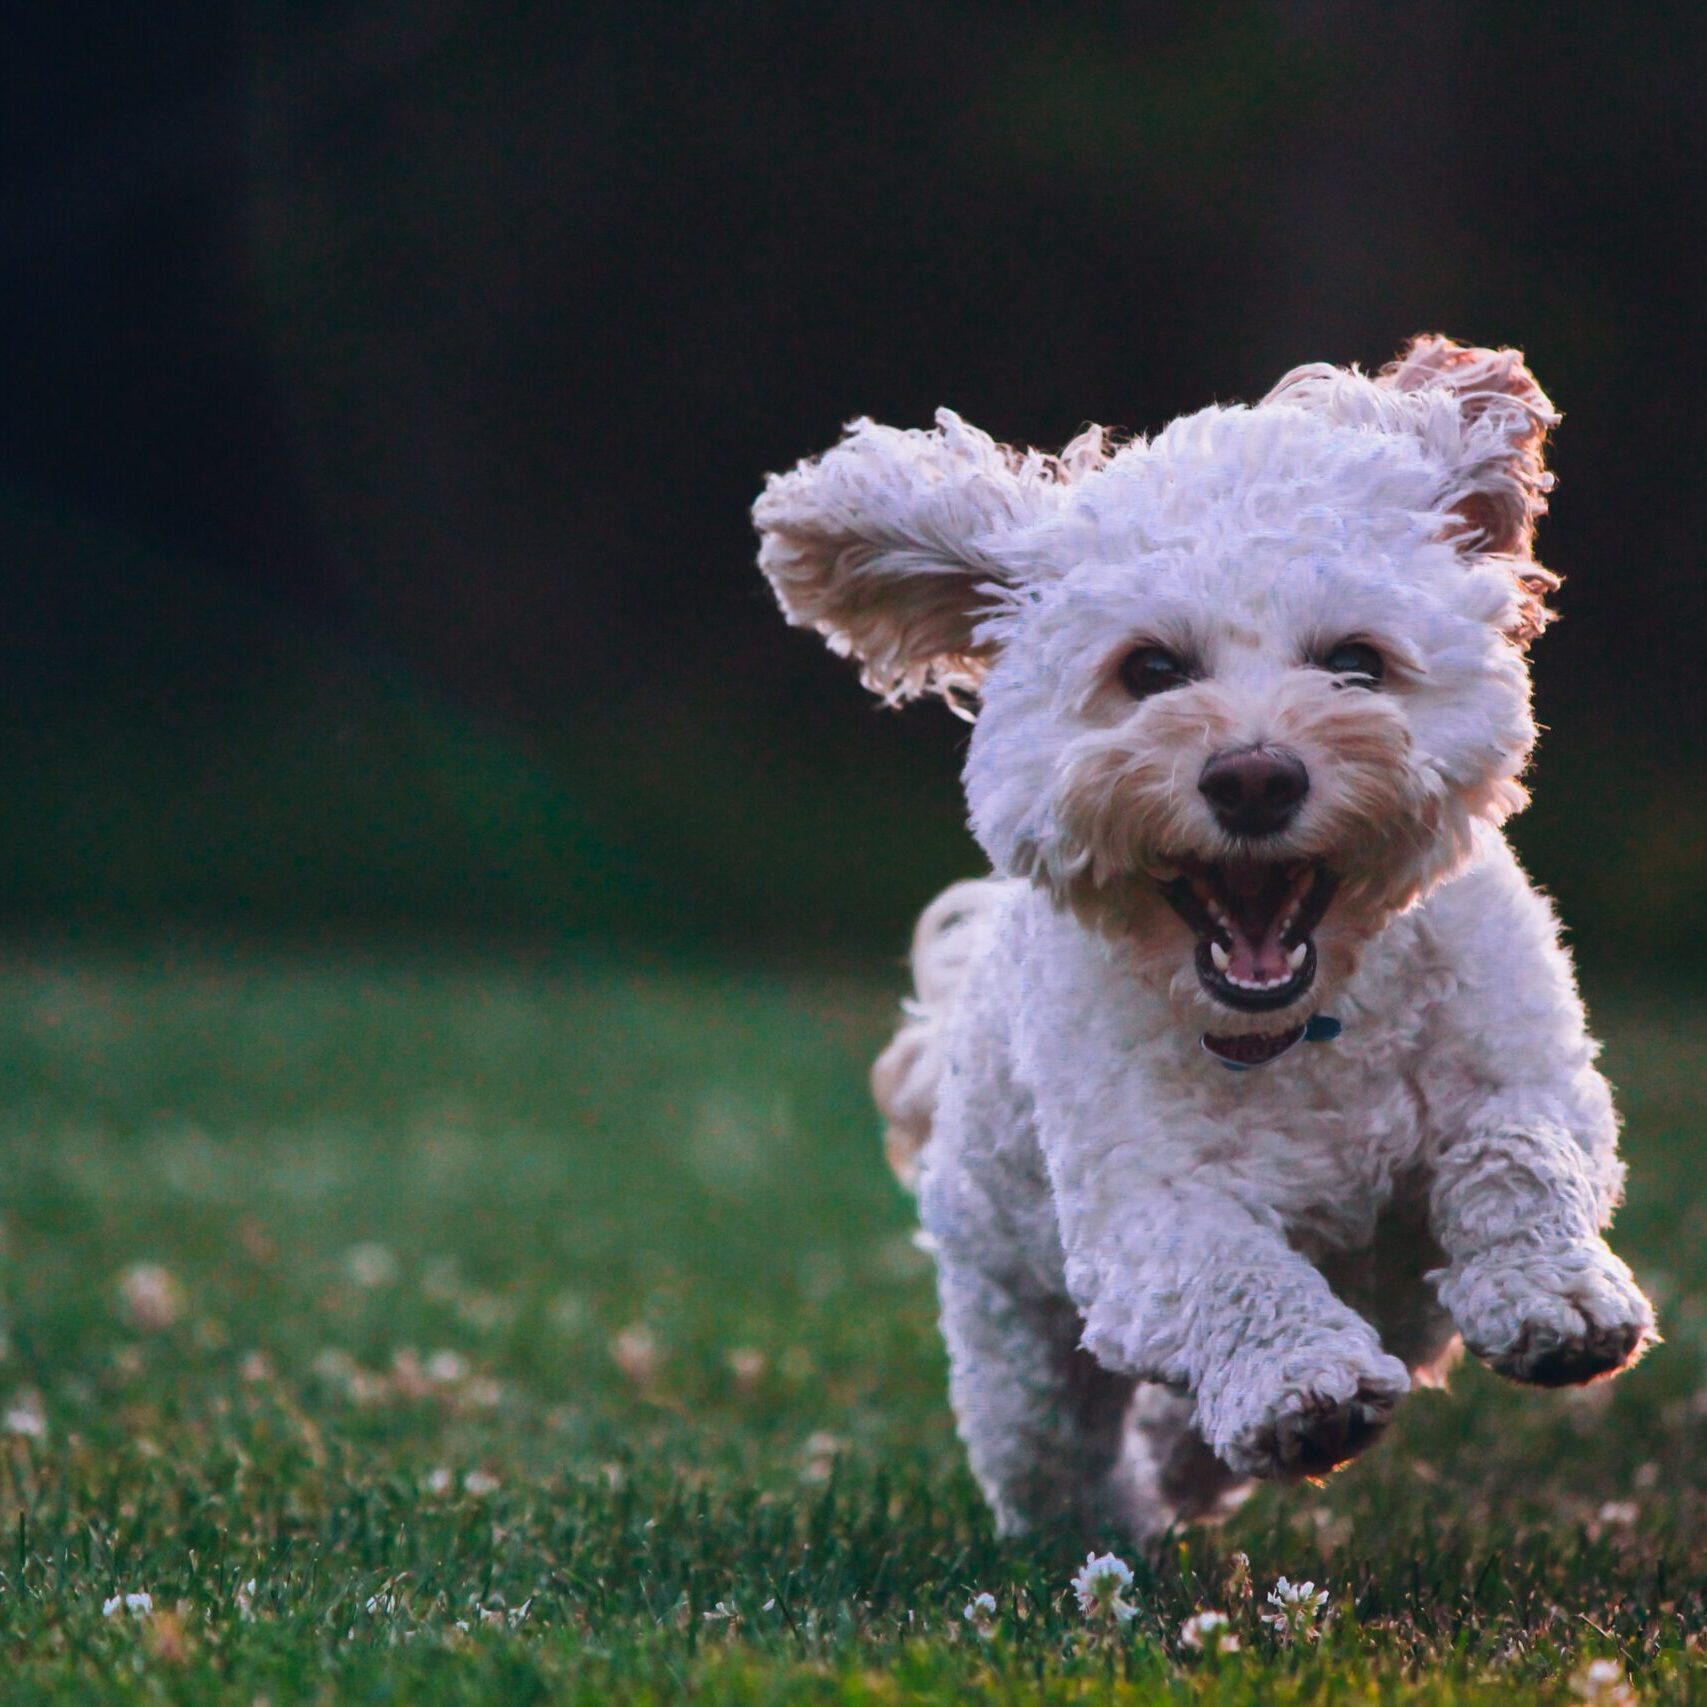 A very happy dog running on a field of grass